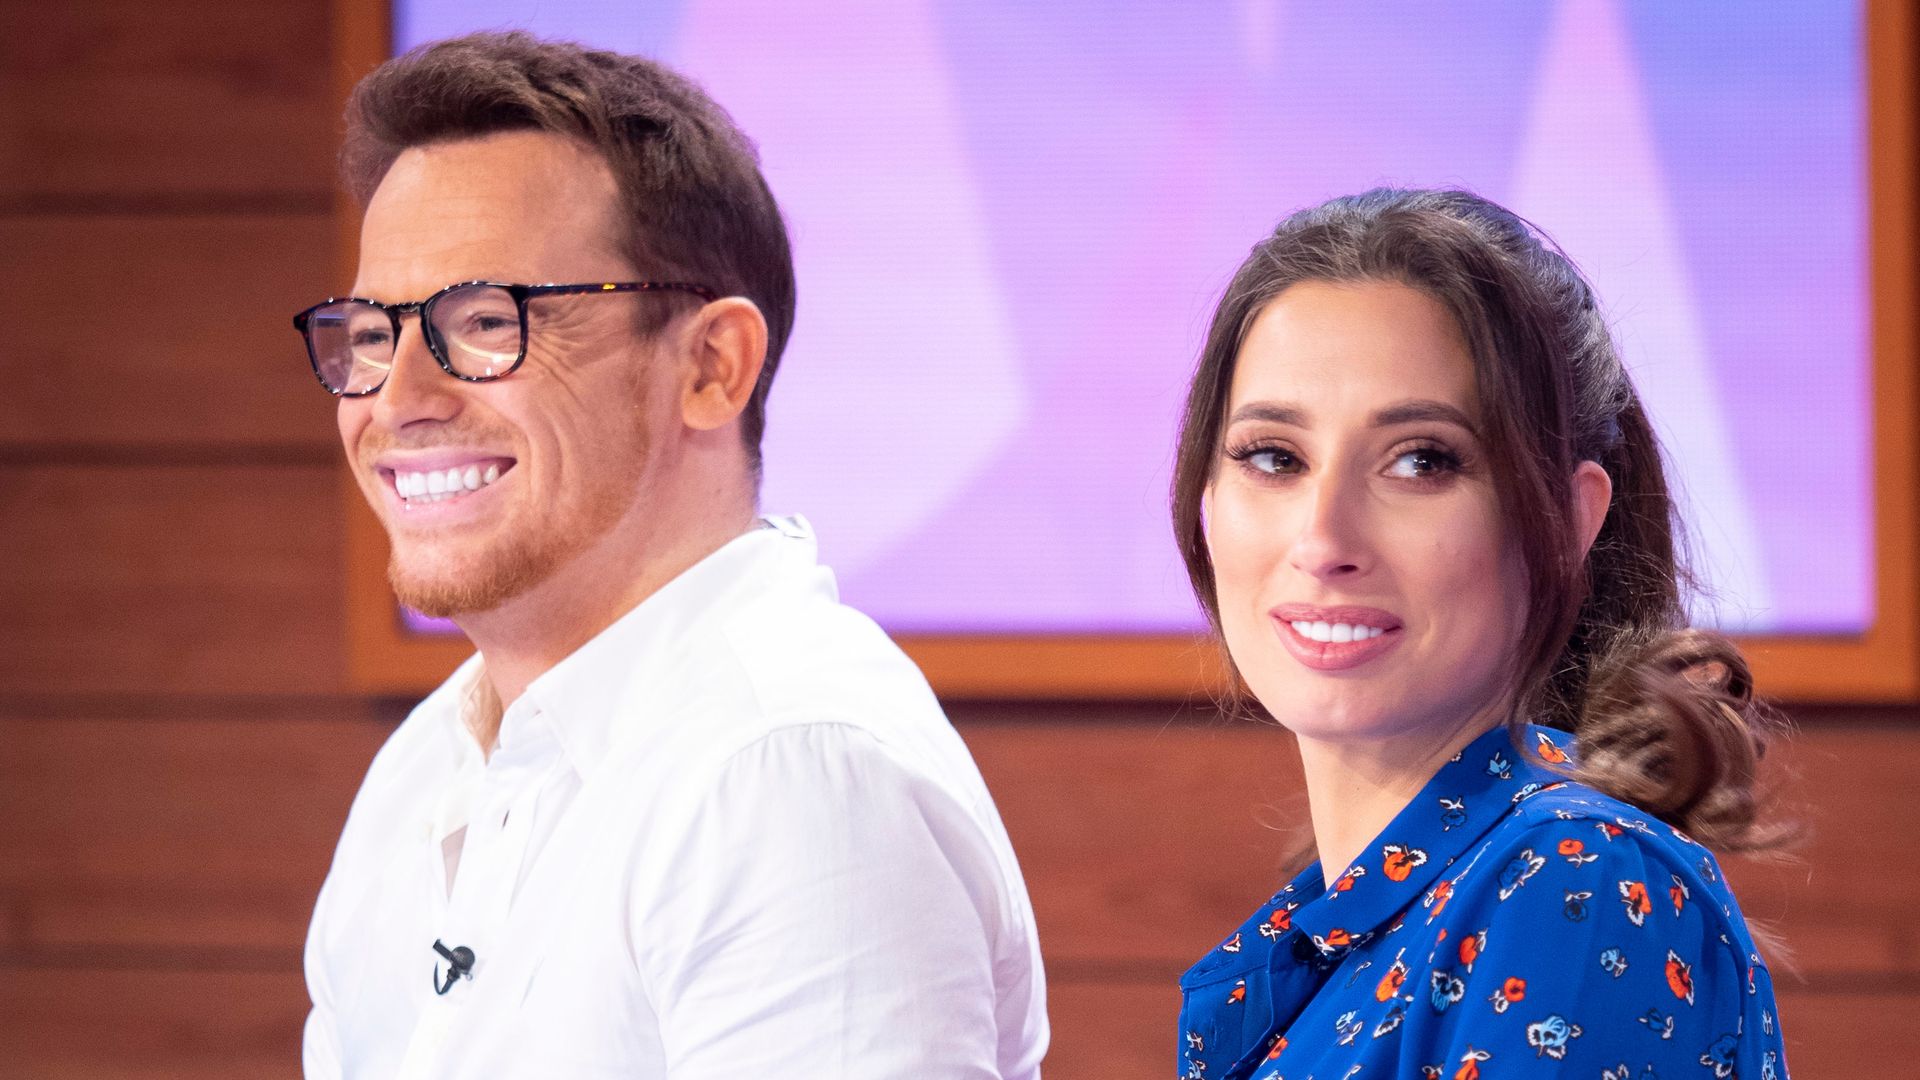 Joe Swash and Stacey Solomon on the set of Loose Women